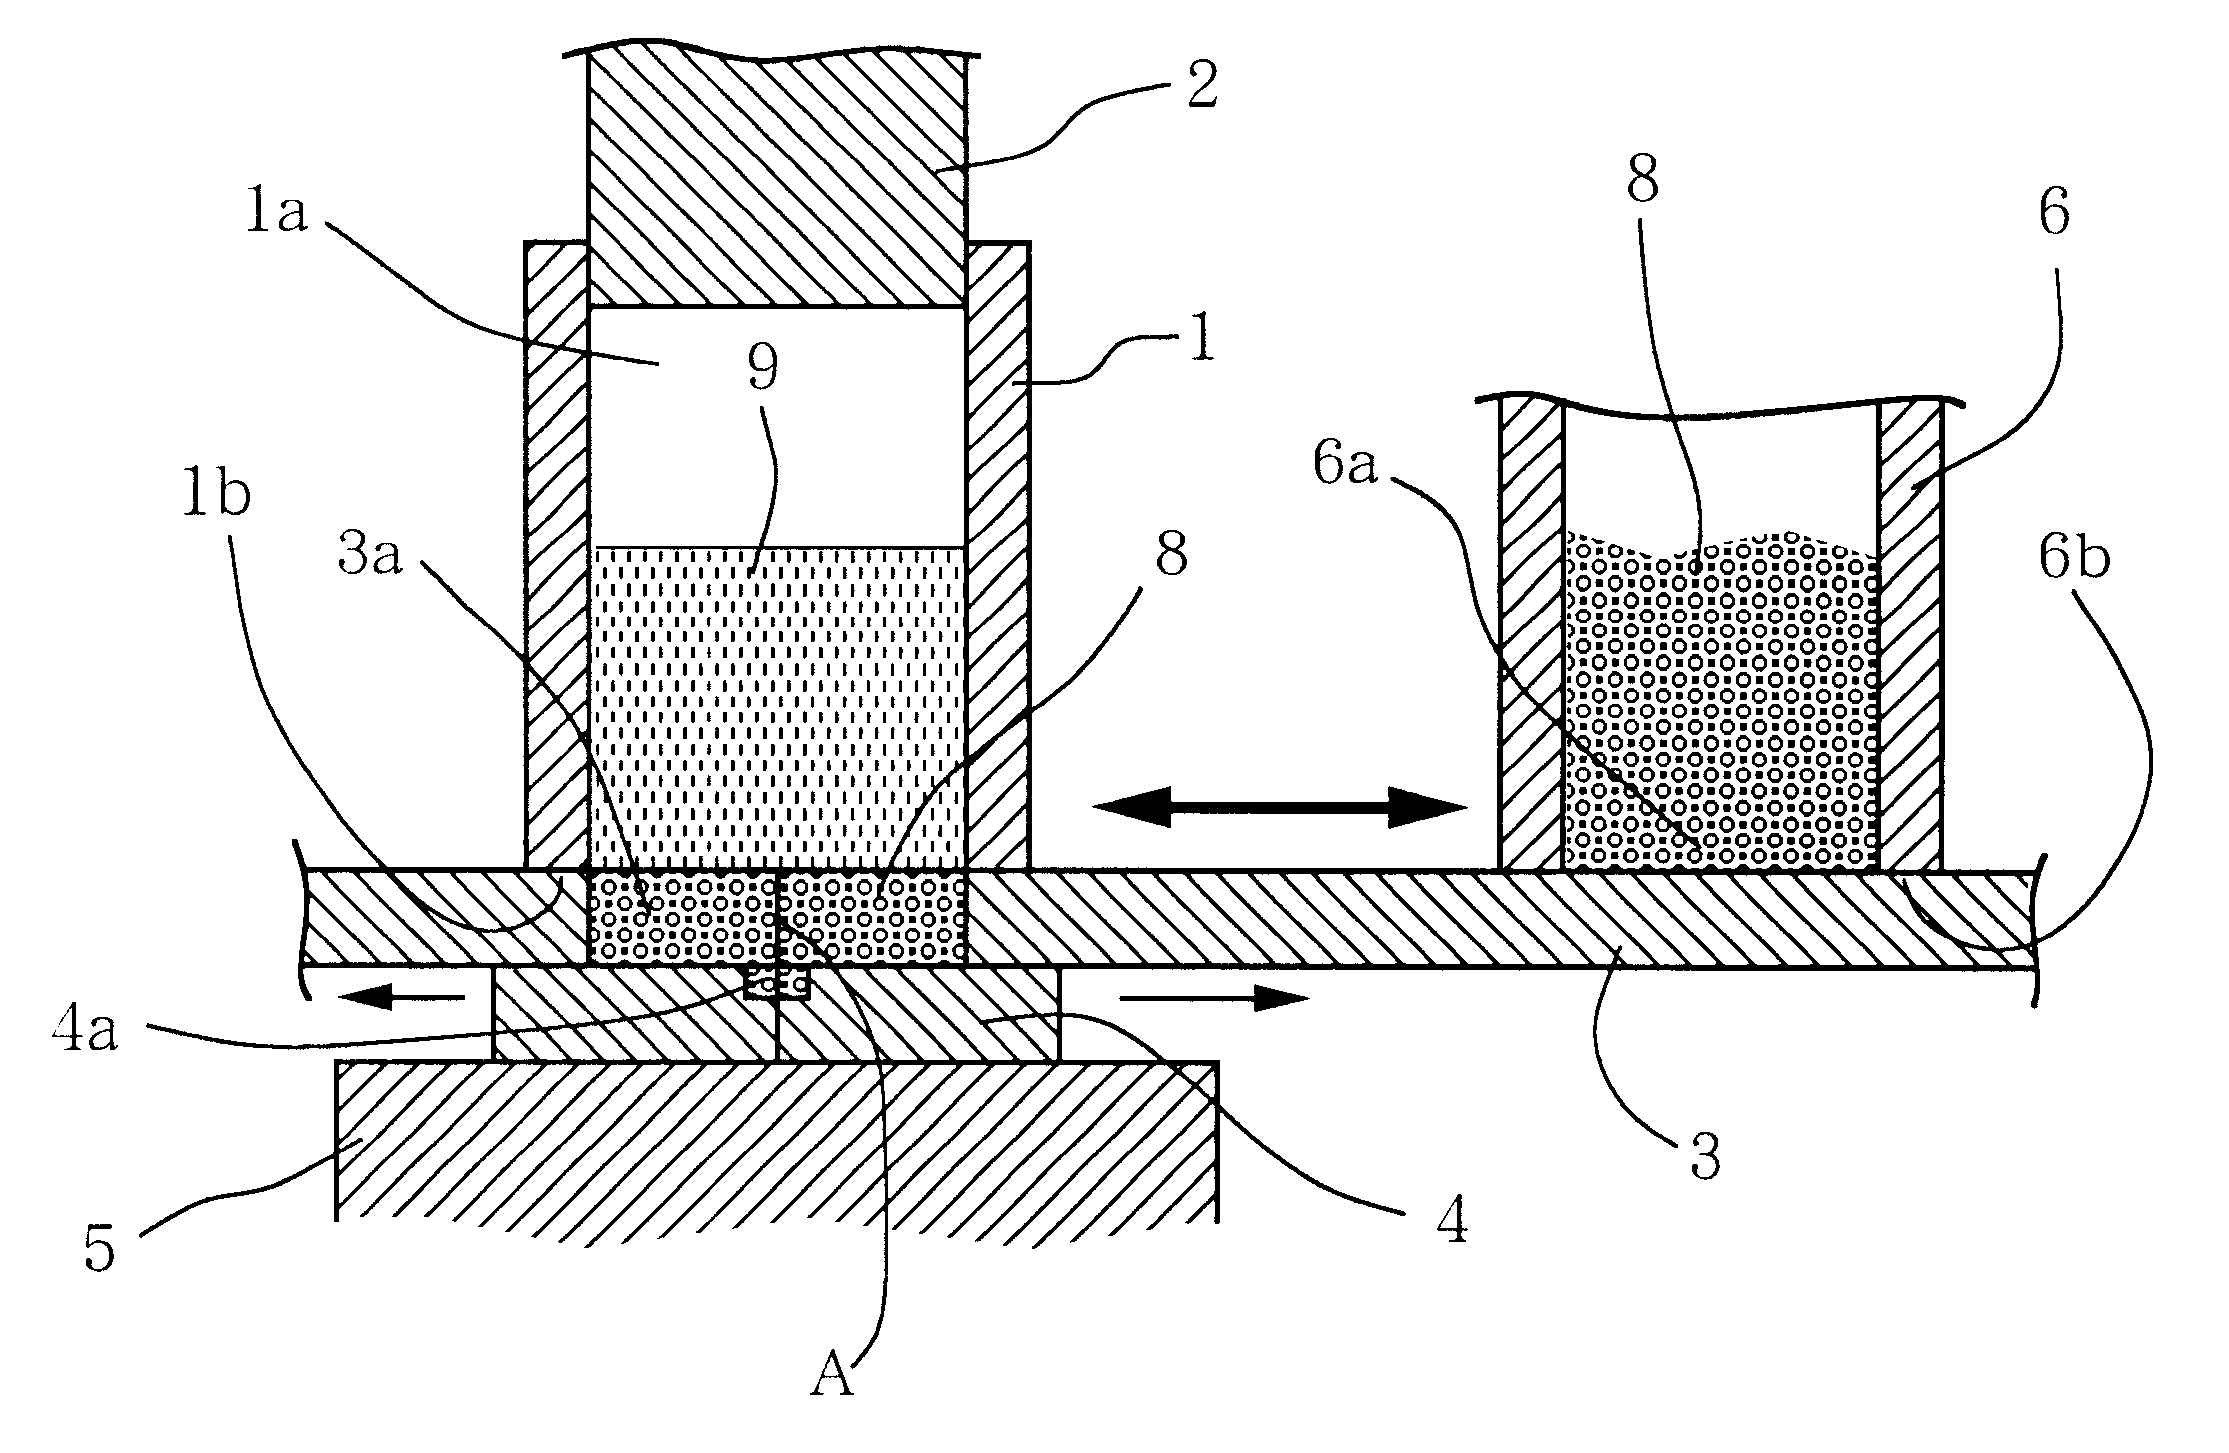 Friction component manufacturing apparatus and method